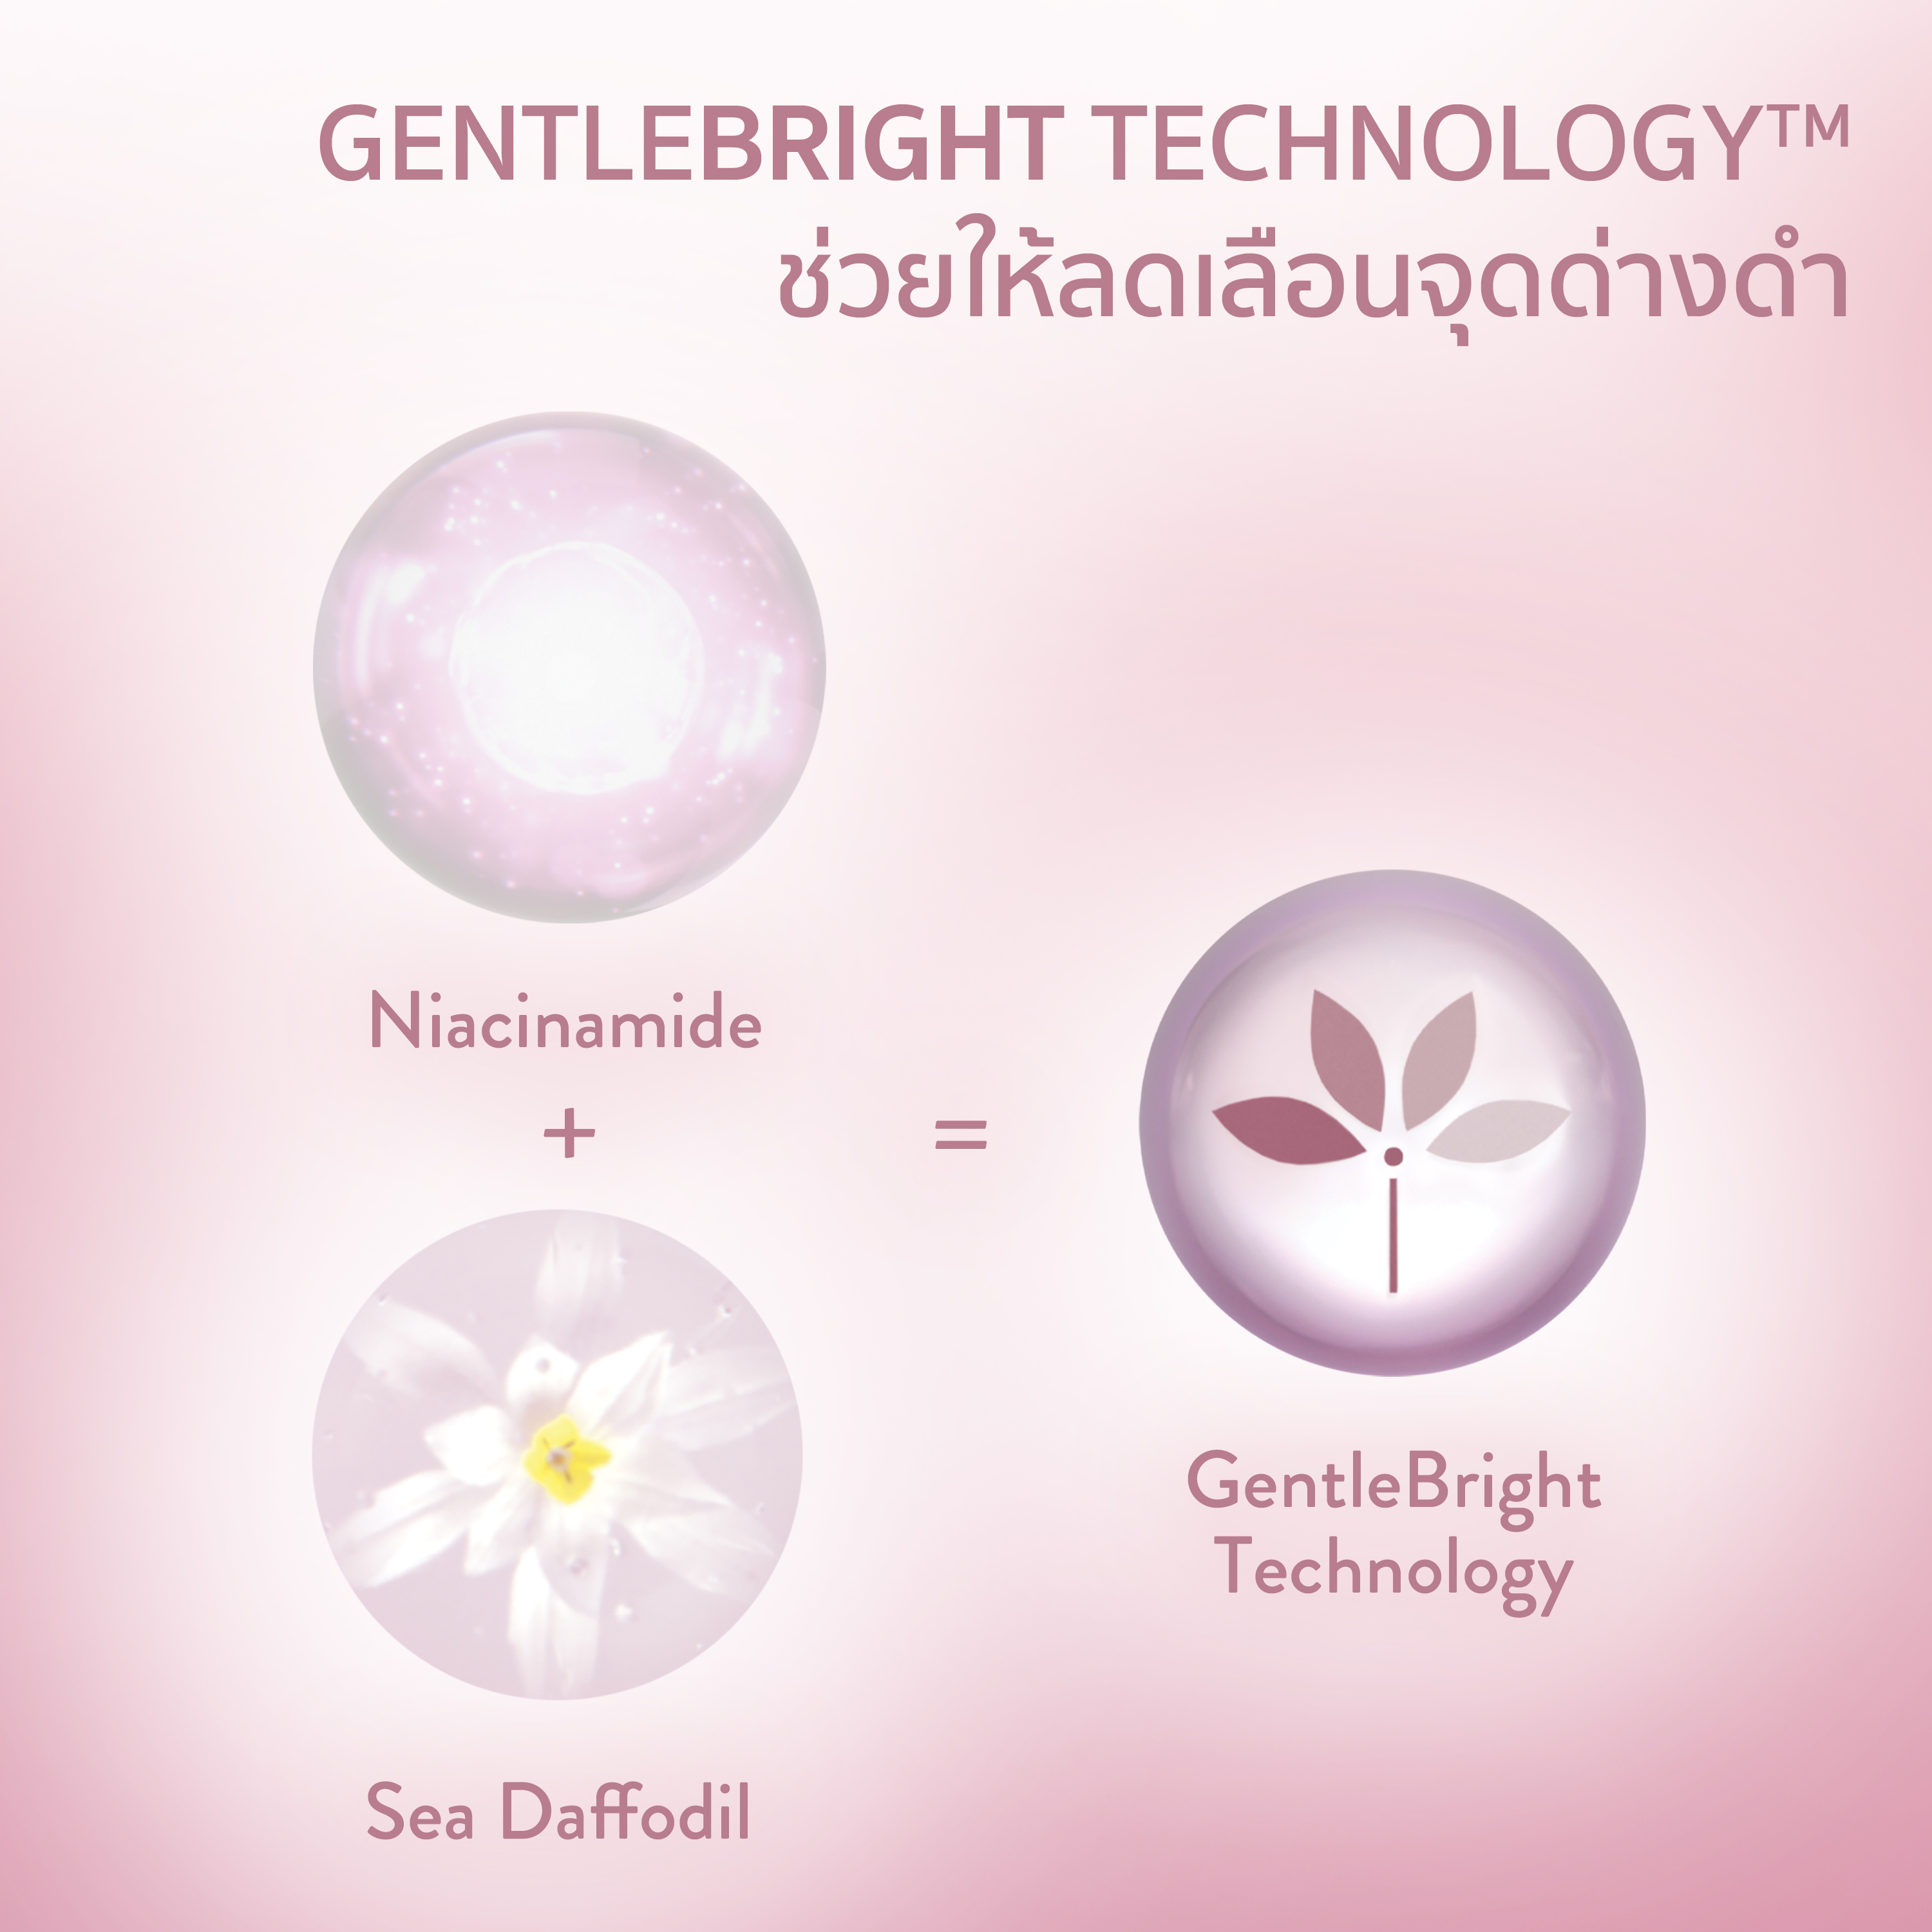 Product Ingredients Image